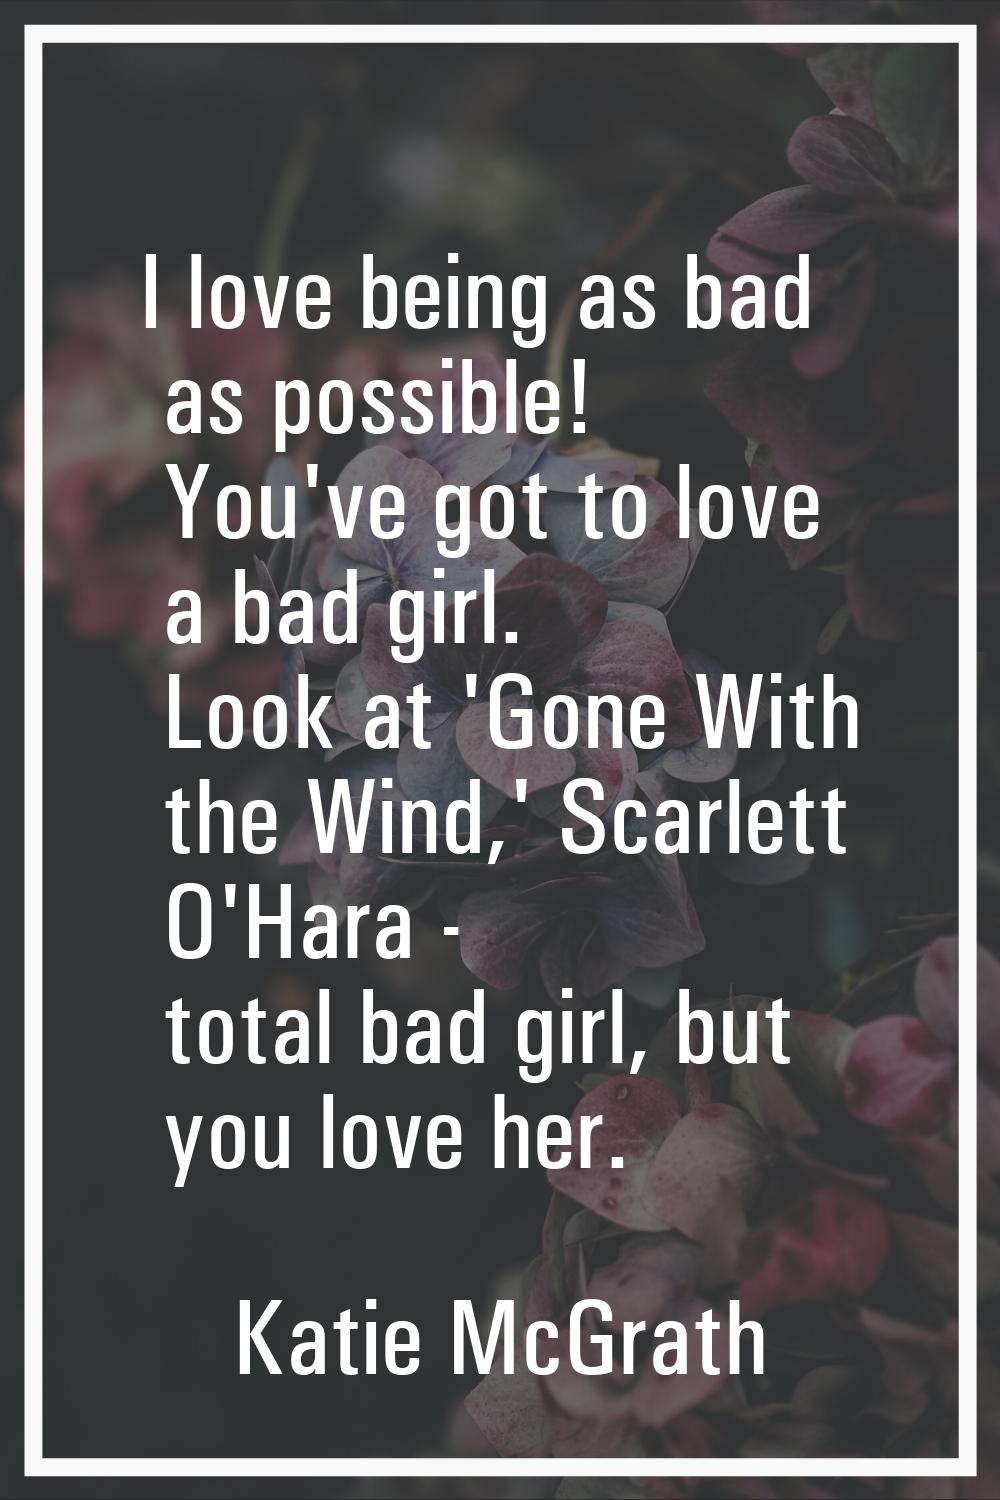 I love being as bad as possible! You've got to love a bad girl. Look at 'Gone With the Wind,' Scarl